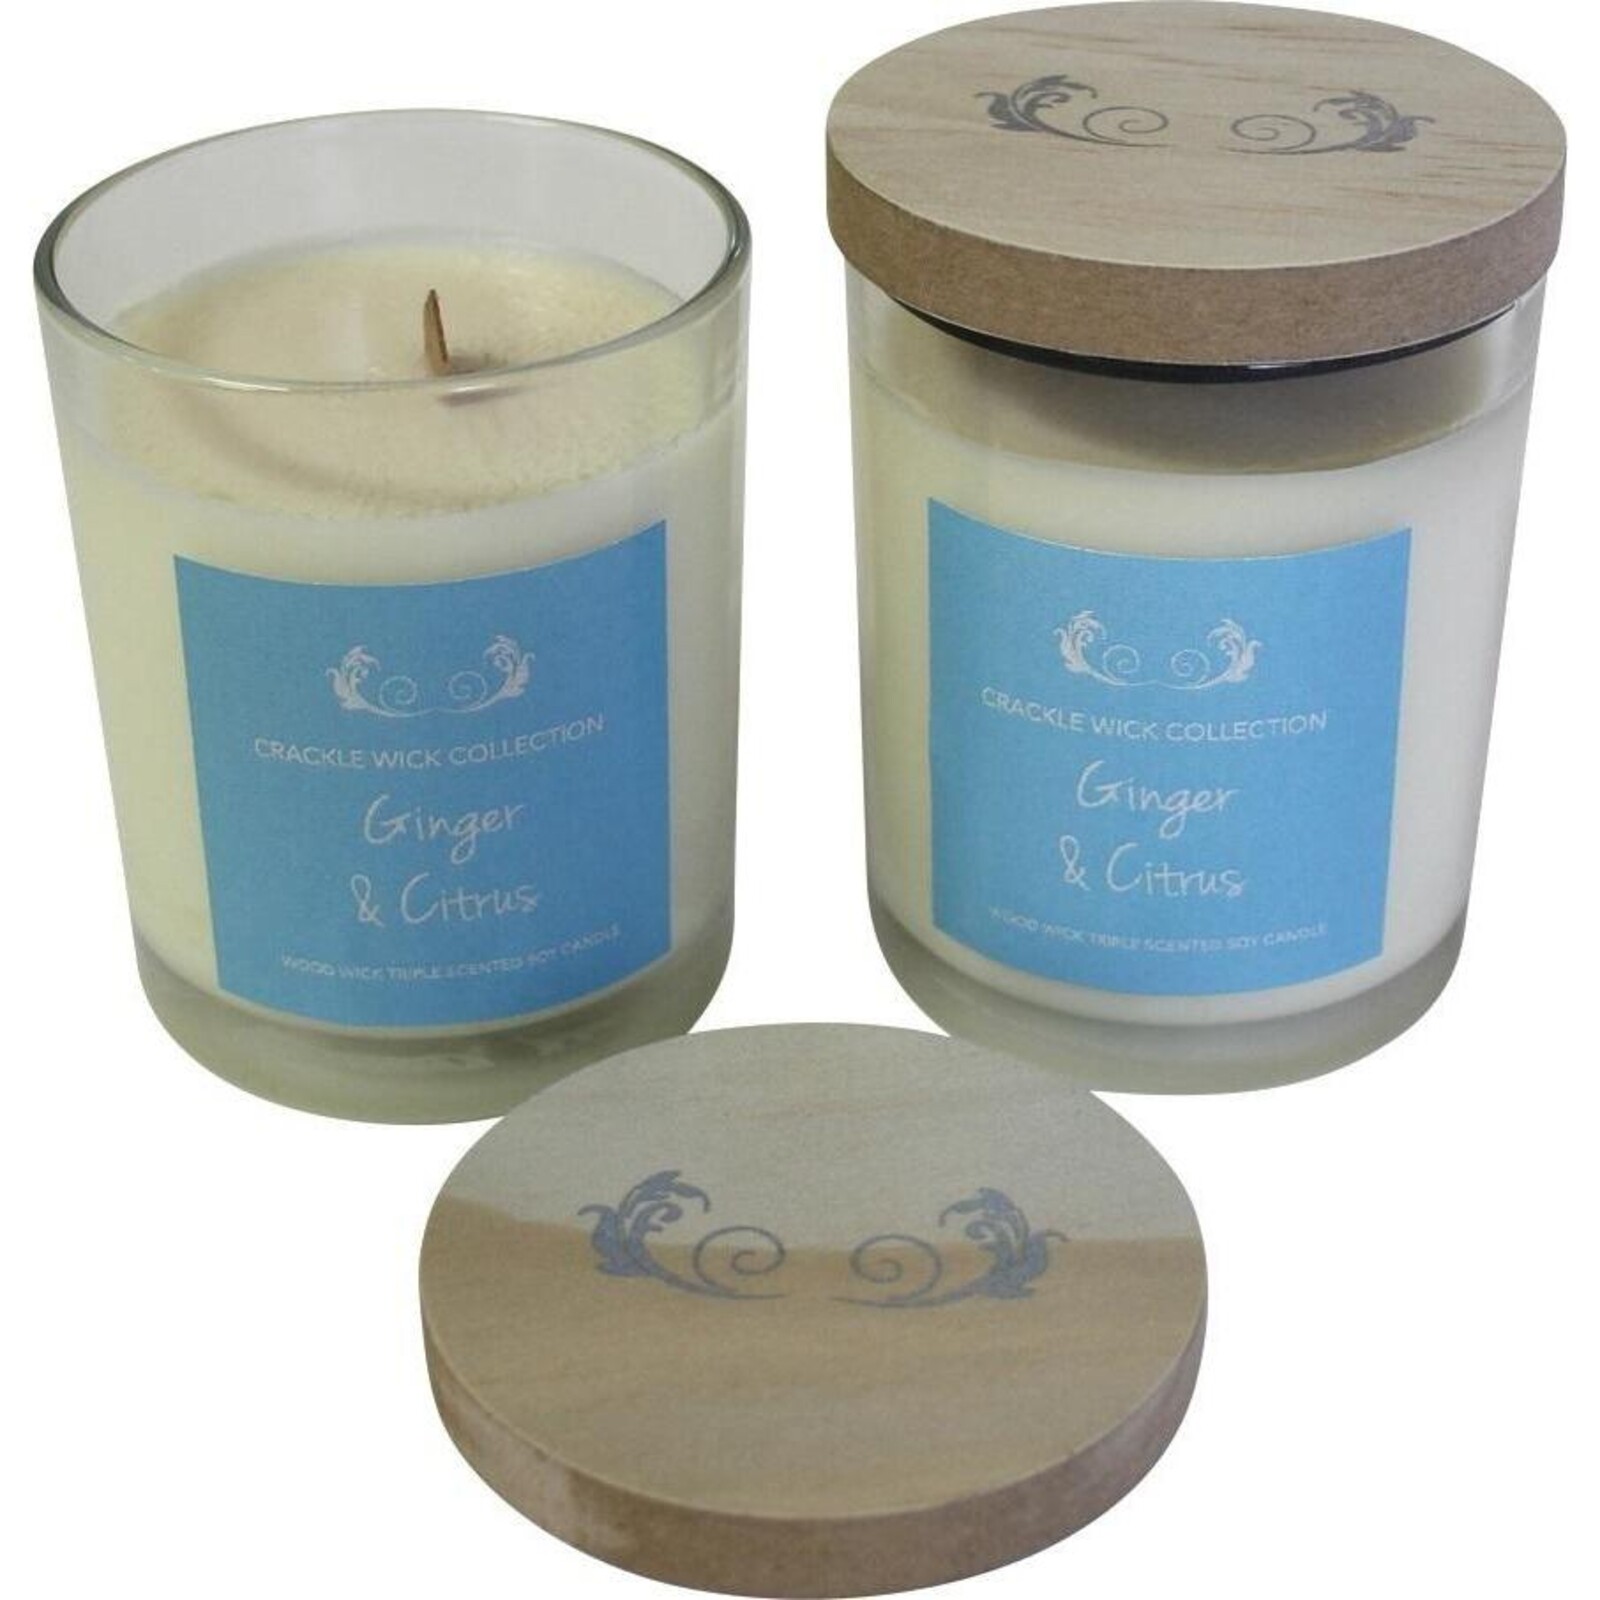 Candle Soy Crackle Wick Ginger & Citrus Sml